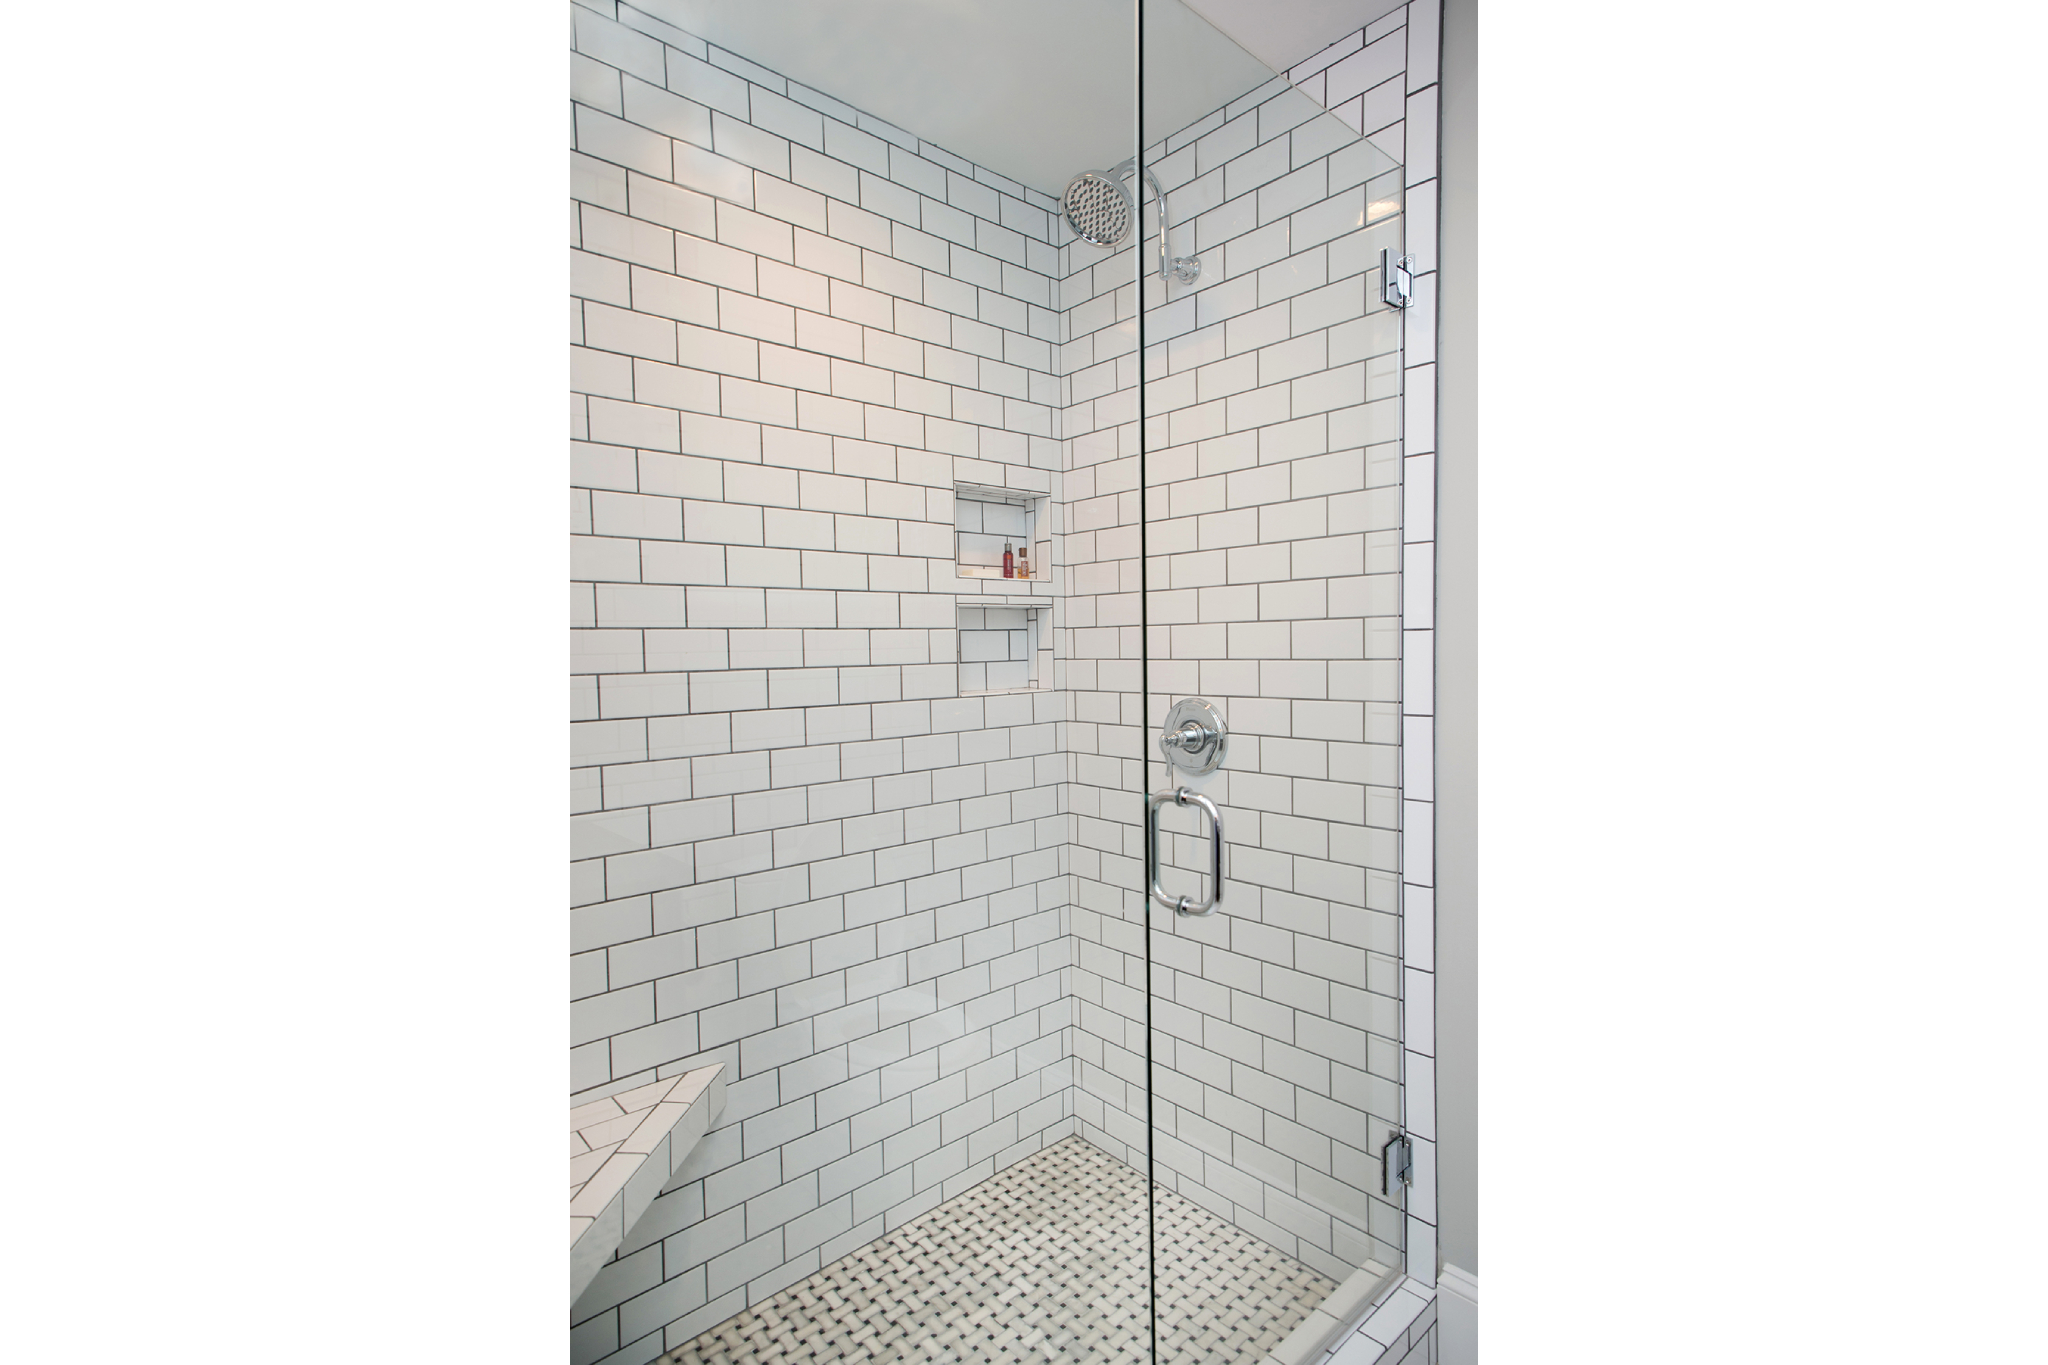 White subway-tiled shower walls with dark grout and contrasting woven-patterned tile floor